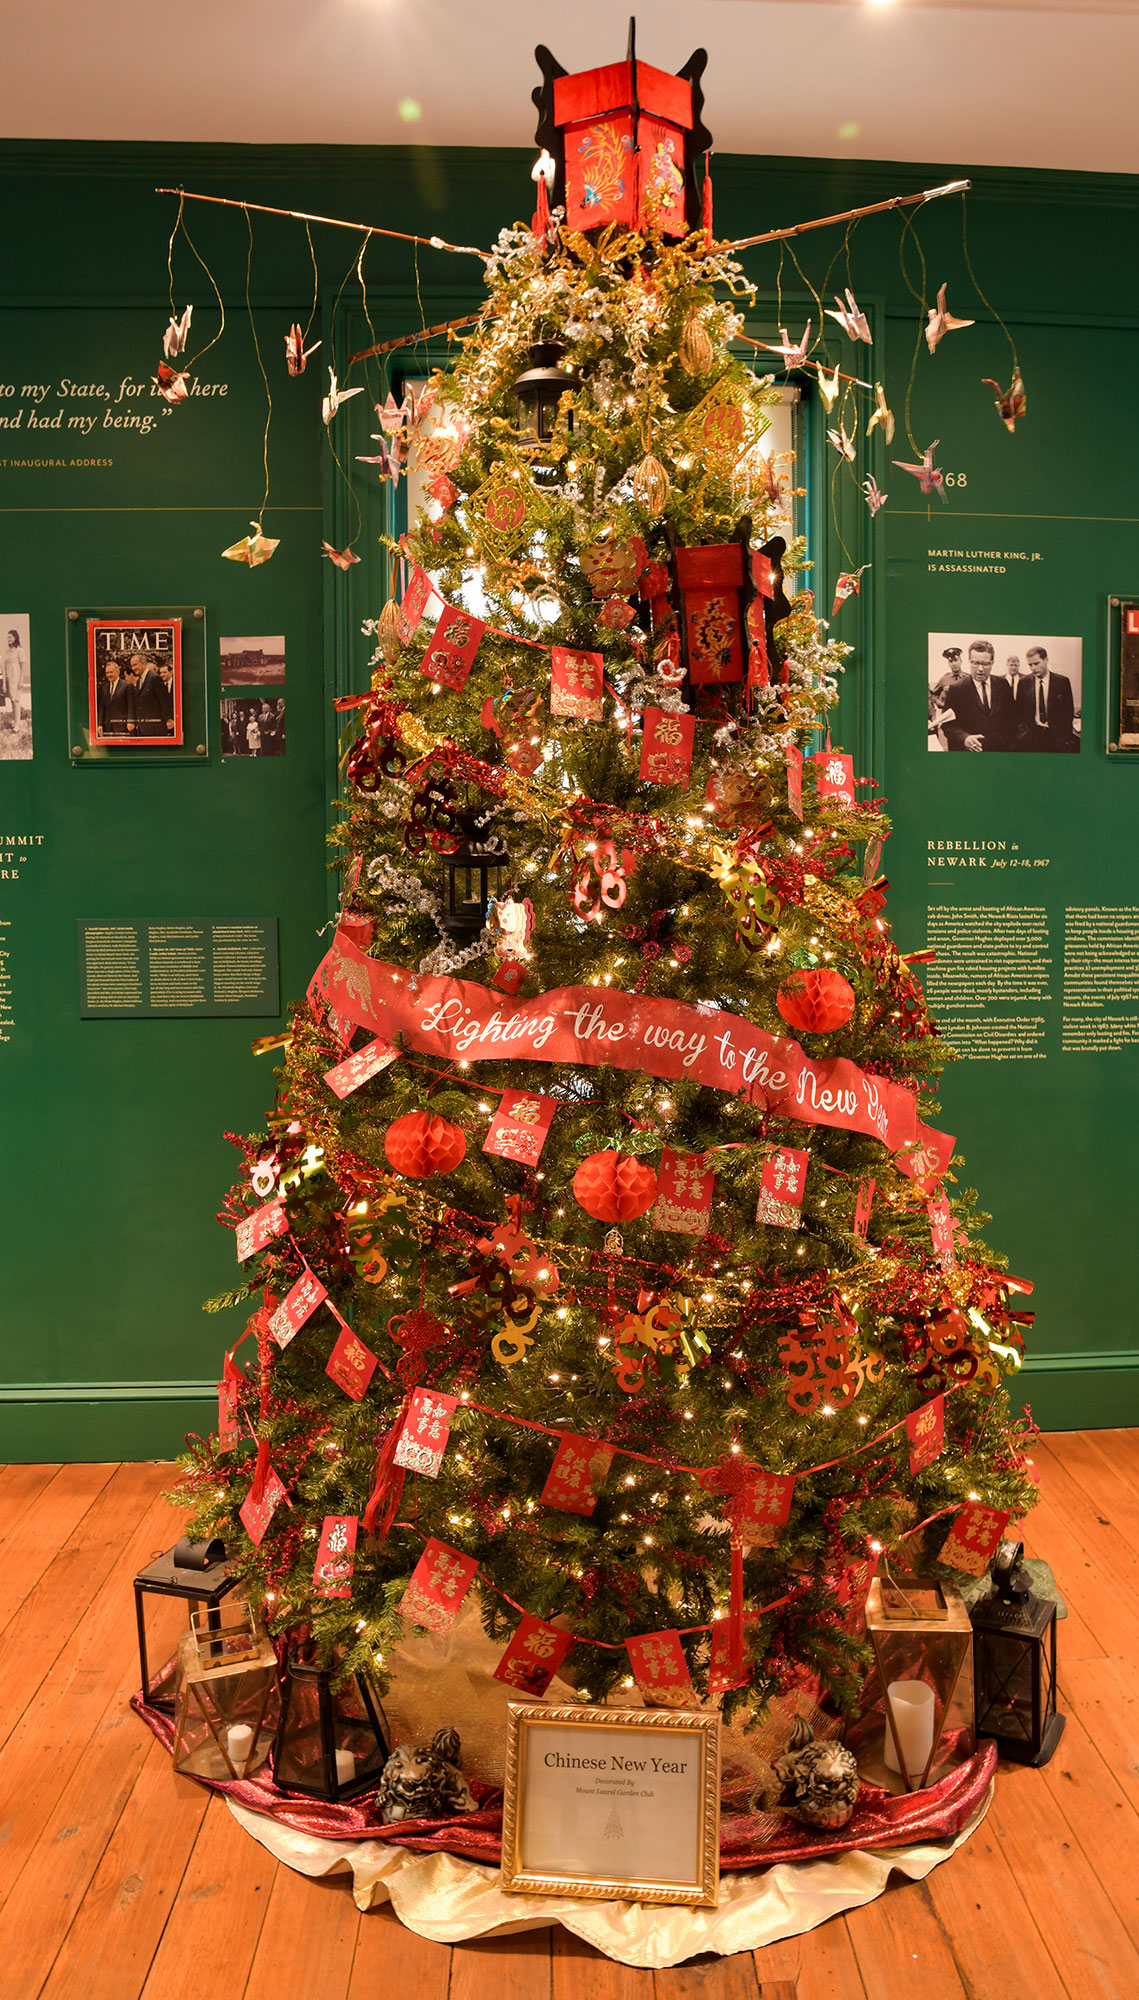 Mount Laurel Garden Club tree called “Chinese New Year” is seen in a room with dark green walls featuring historical information. Bright red garlands wrap around with the center ribbon reading Lighting the Way to the New Year.